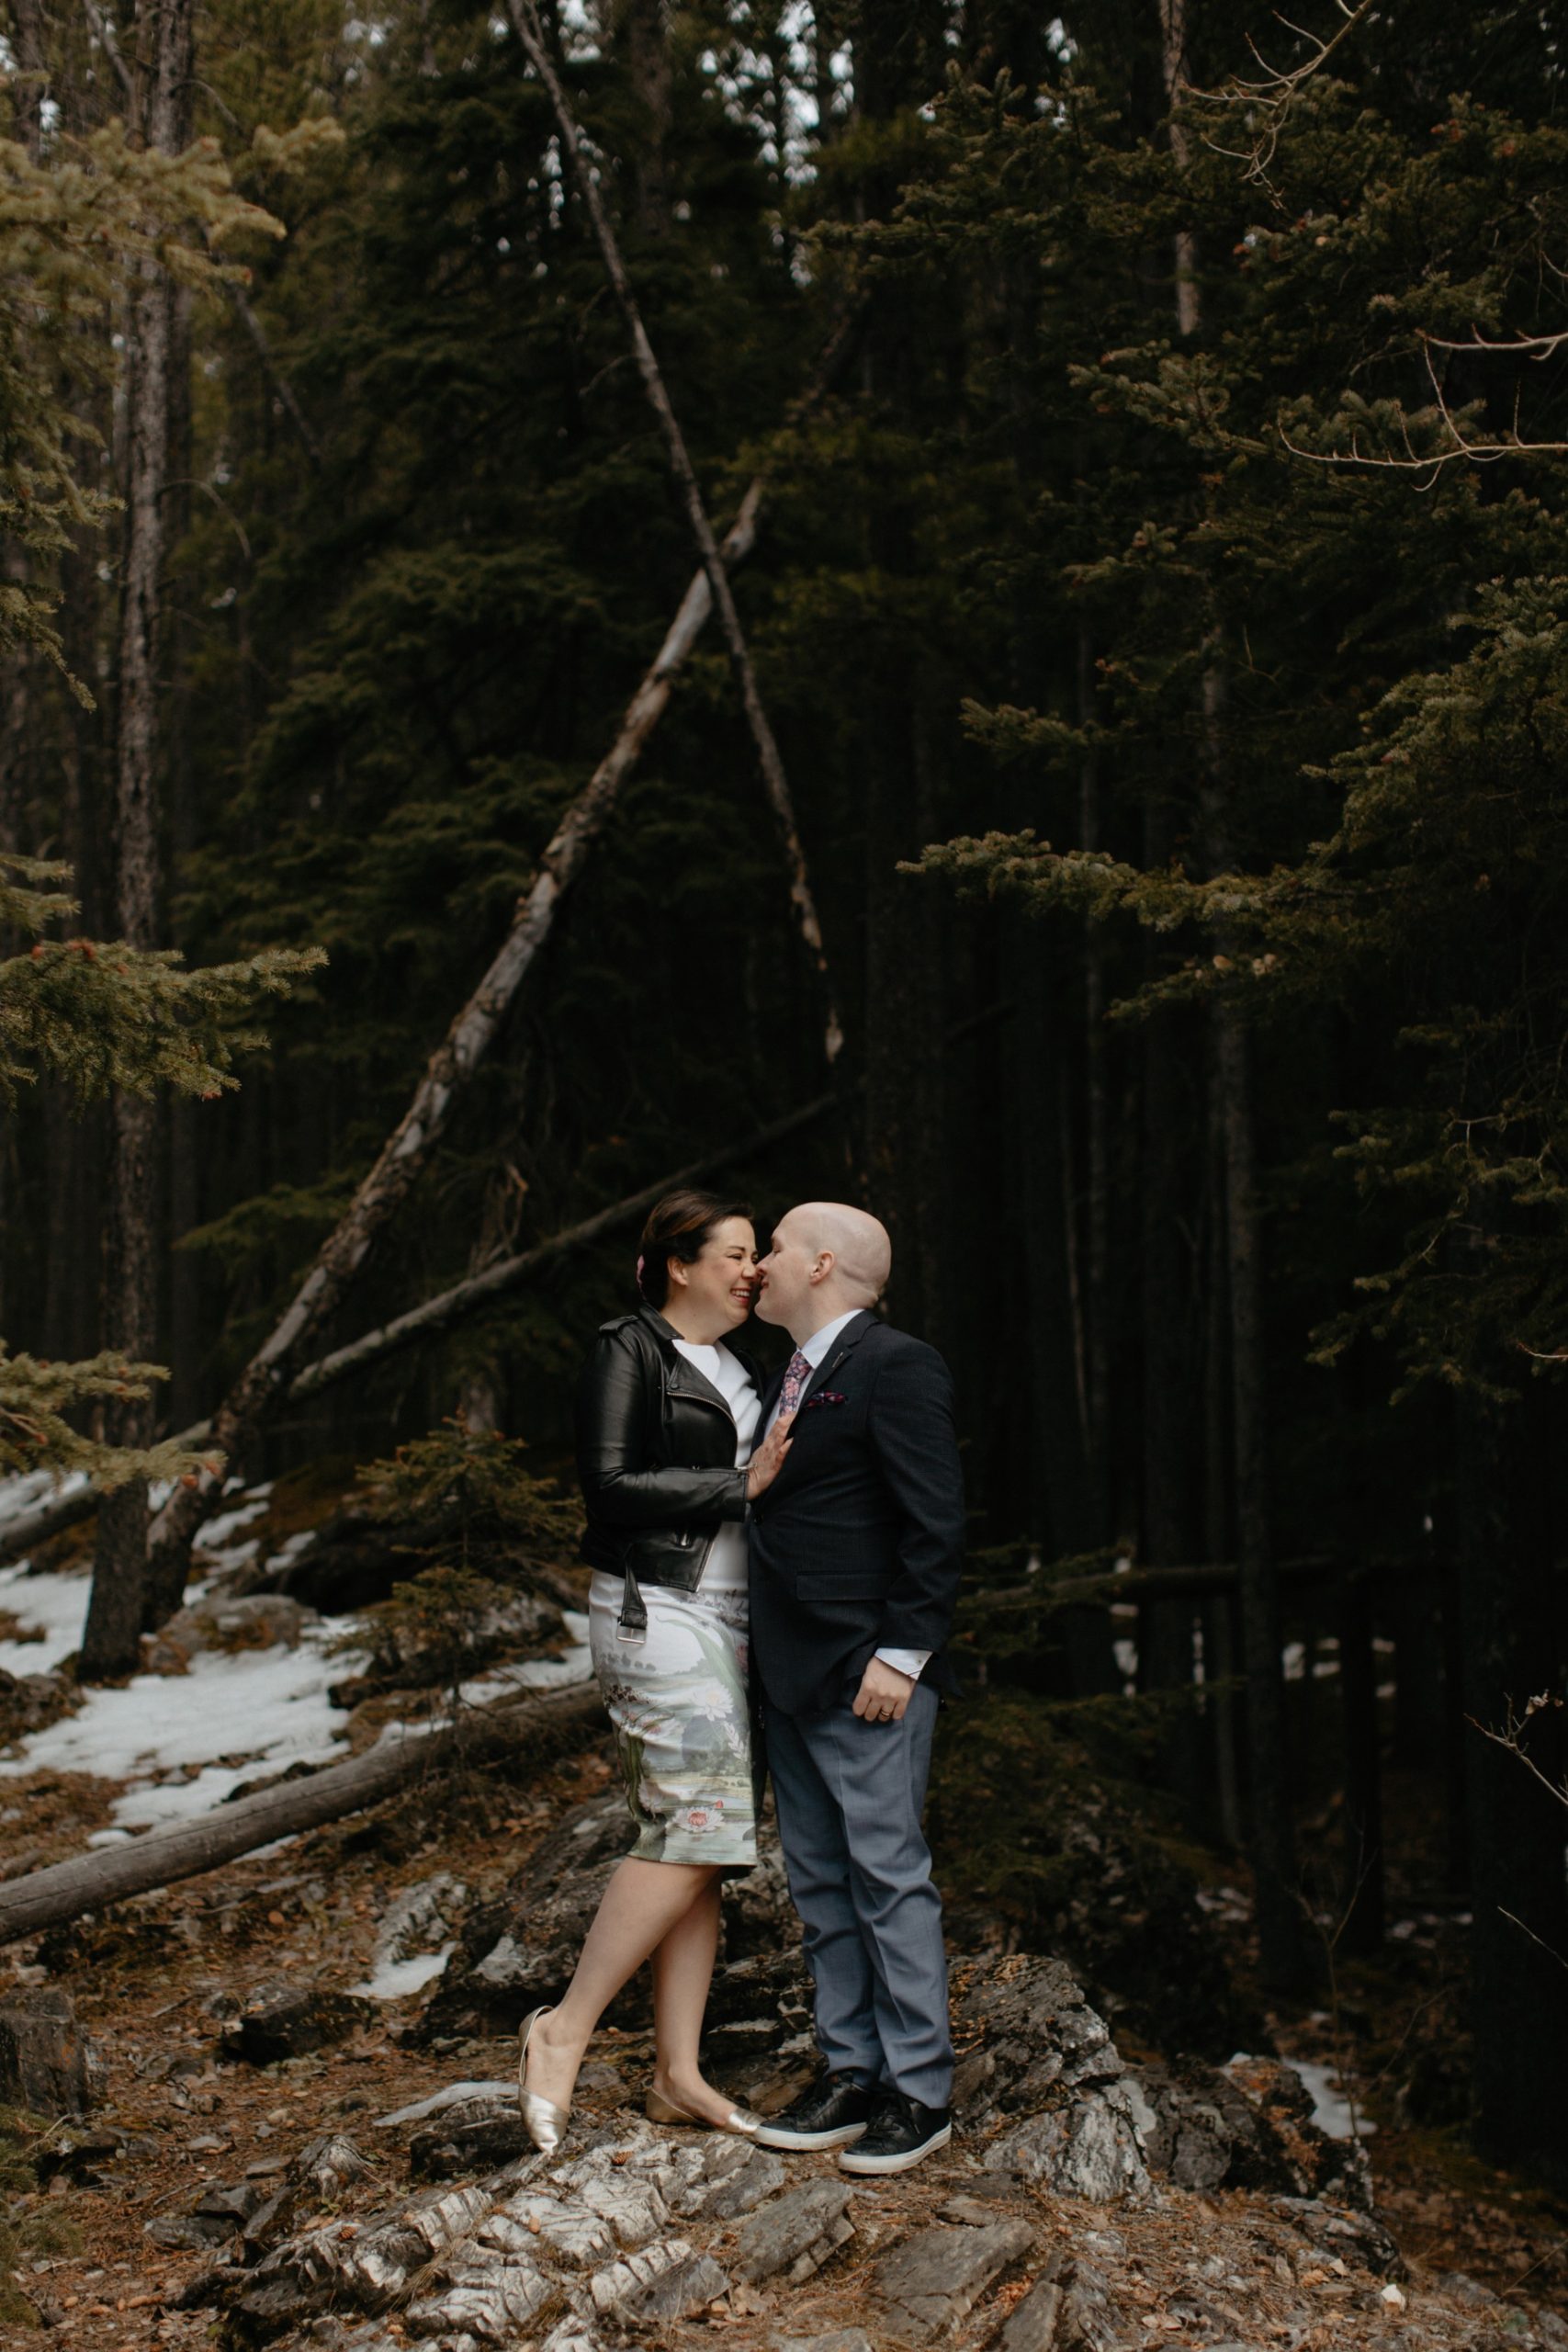 Banff wedding portraits with alternative style, leather jacket and gold shoes